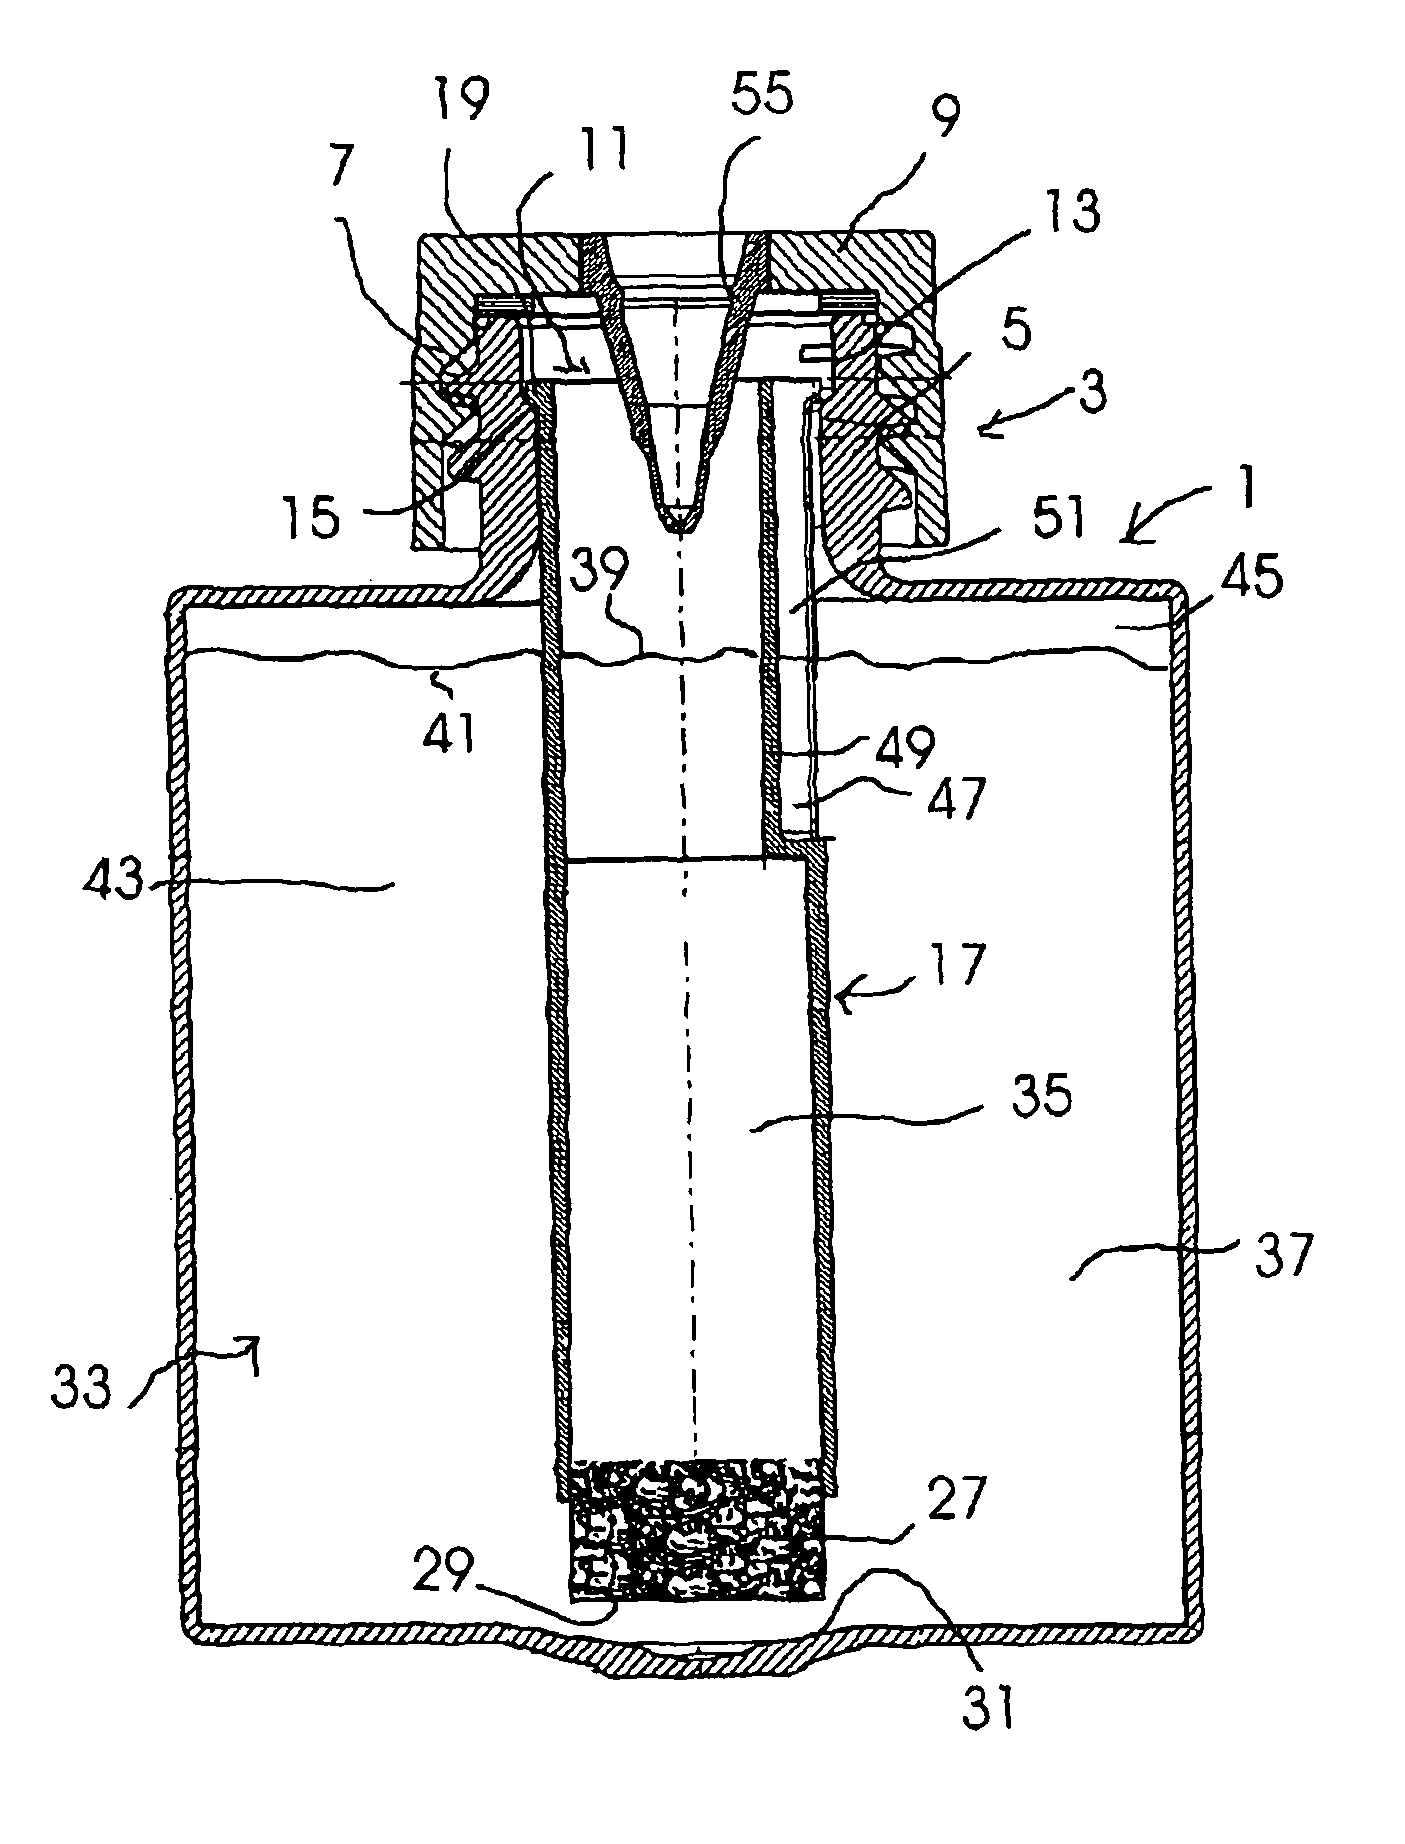 Liquid container with an extraction chimney